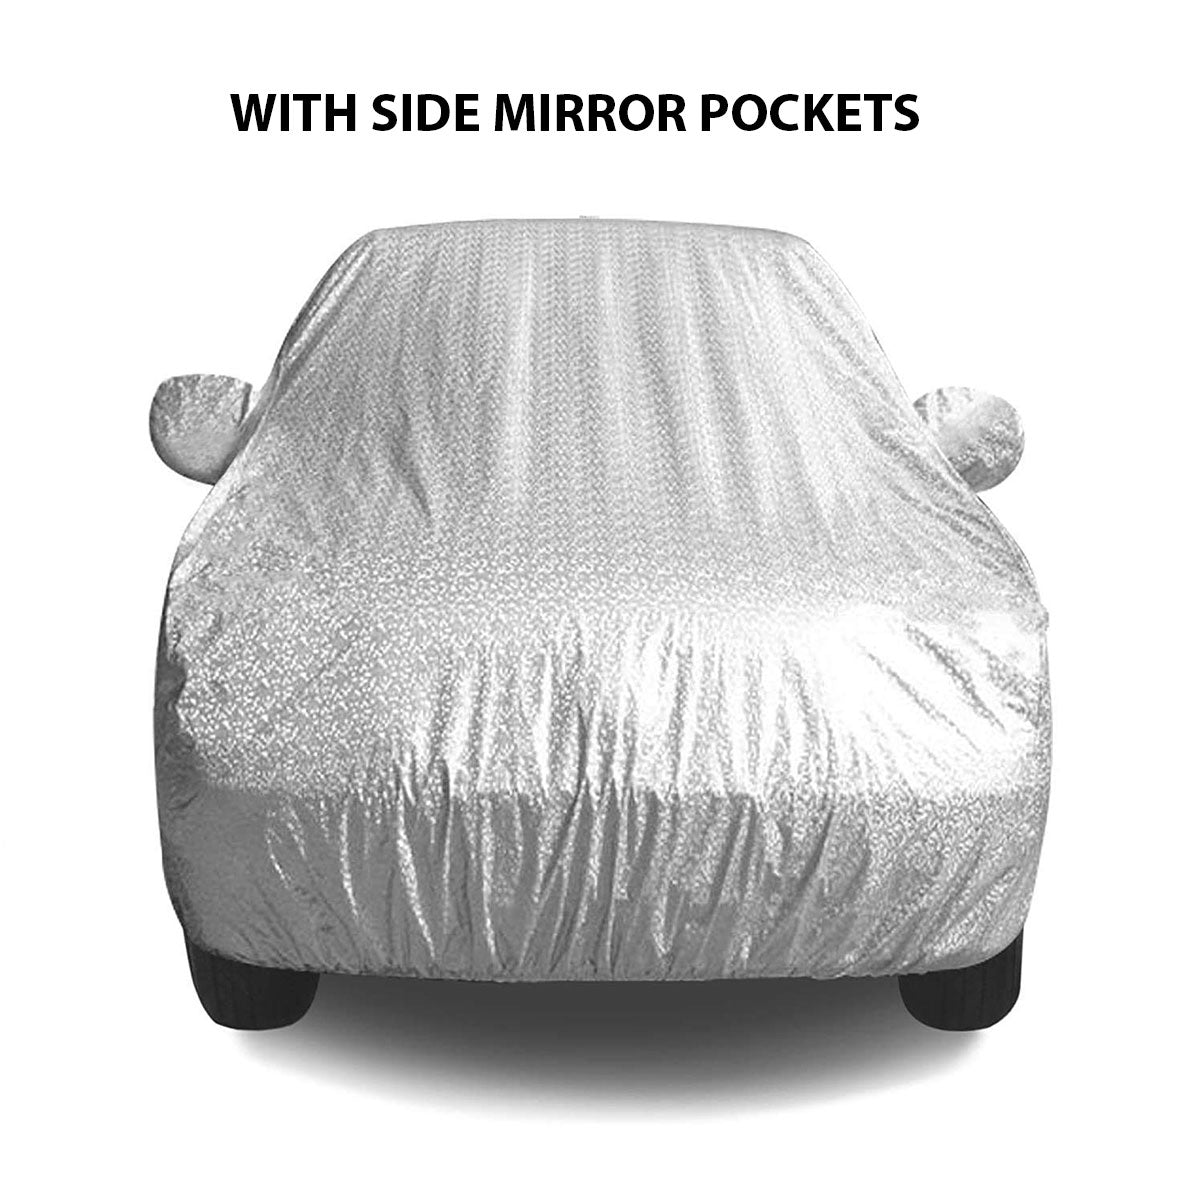 Oshotto Spyro Silver Anti Reflective, dustproof and Water Proof Car Body Cover with Mirror Pockets For Tata Altroz